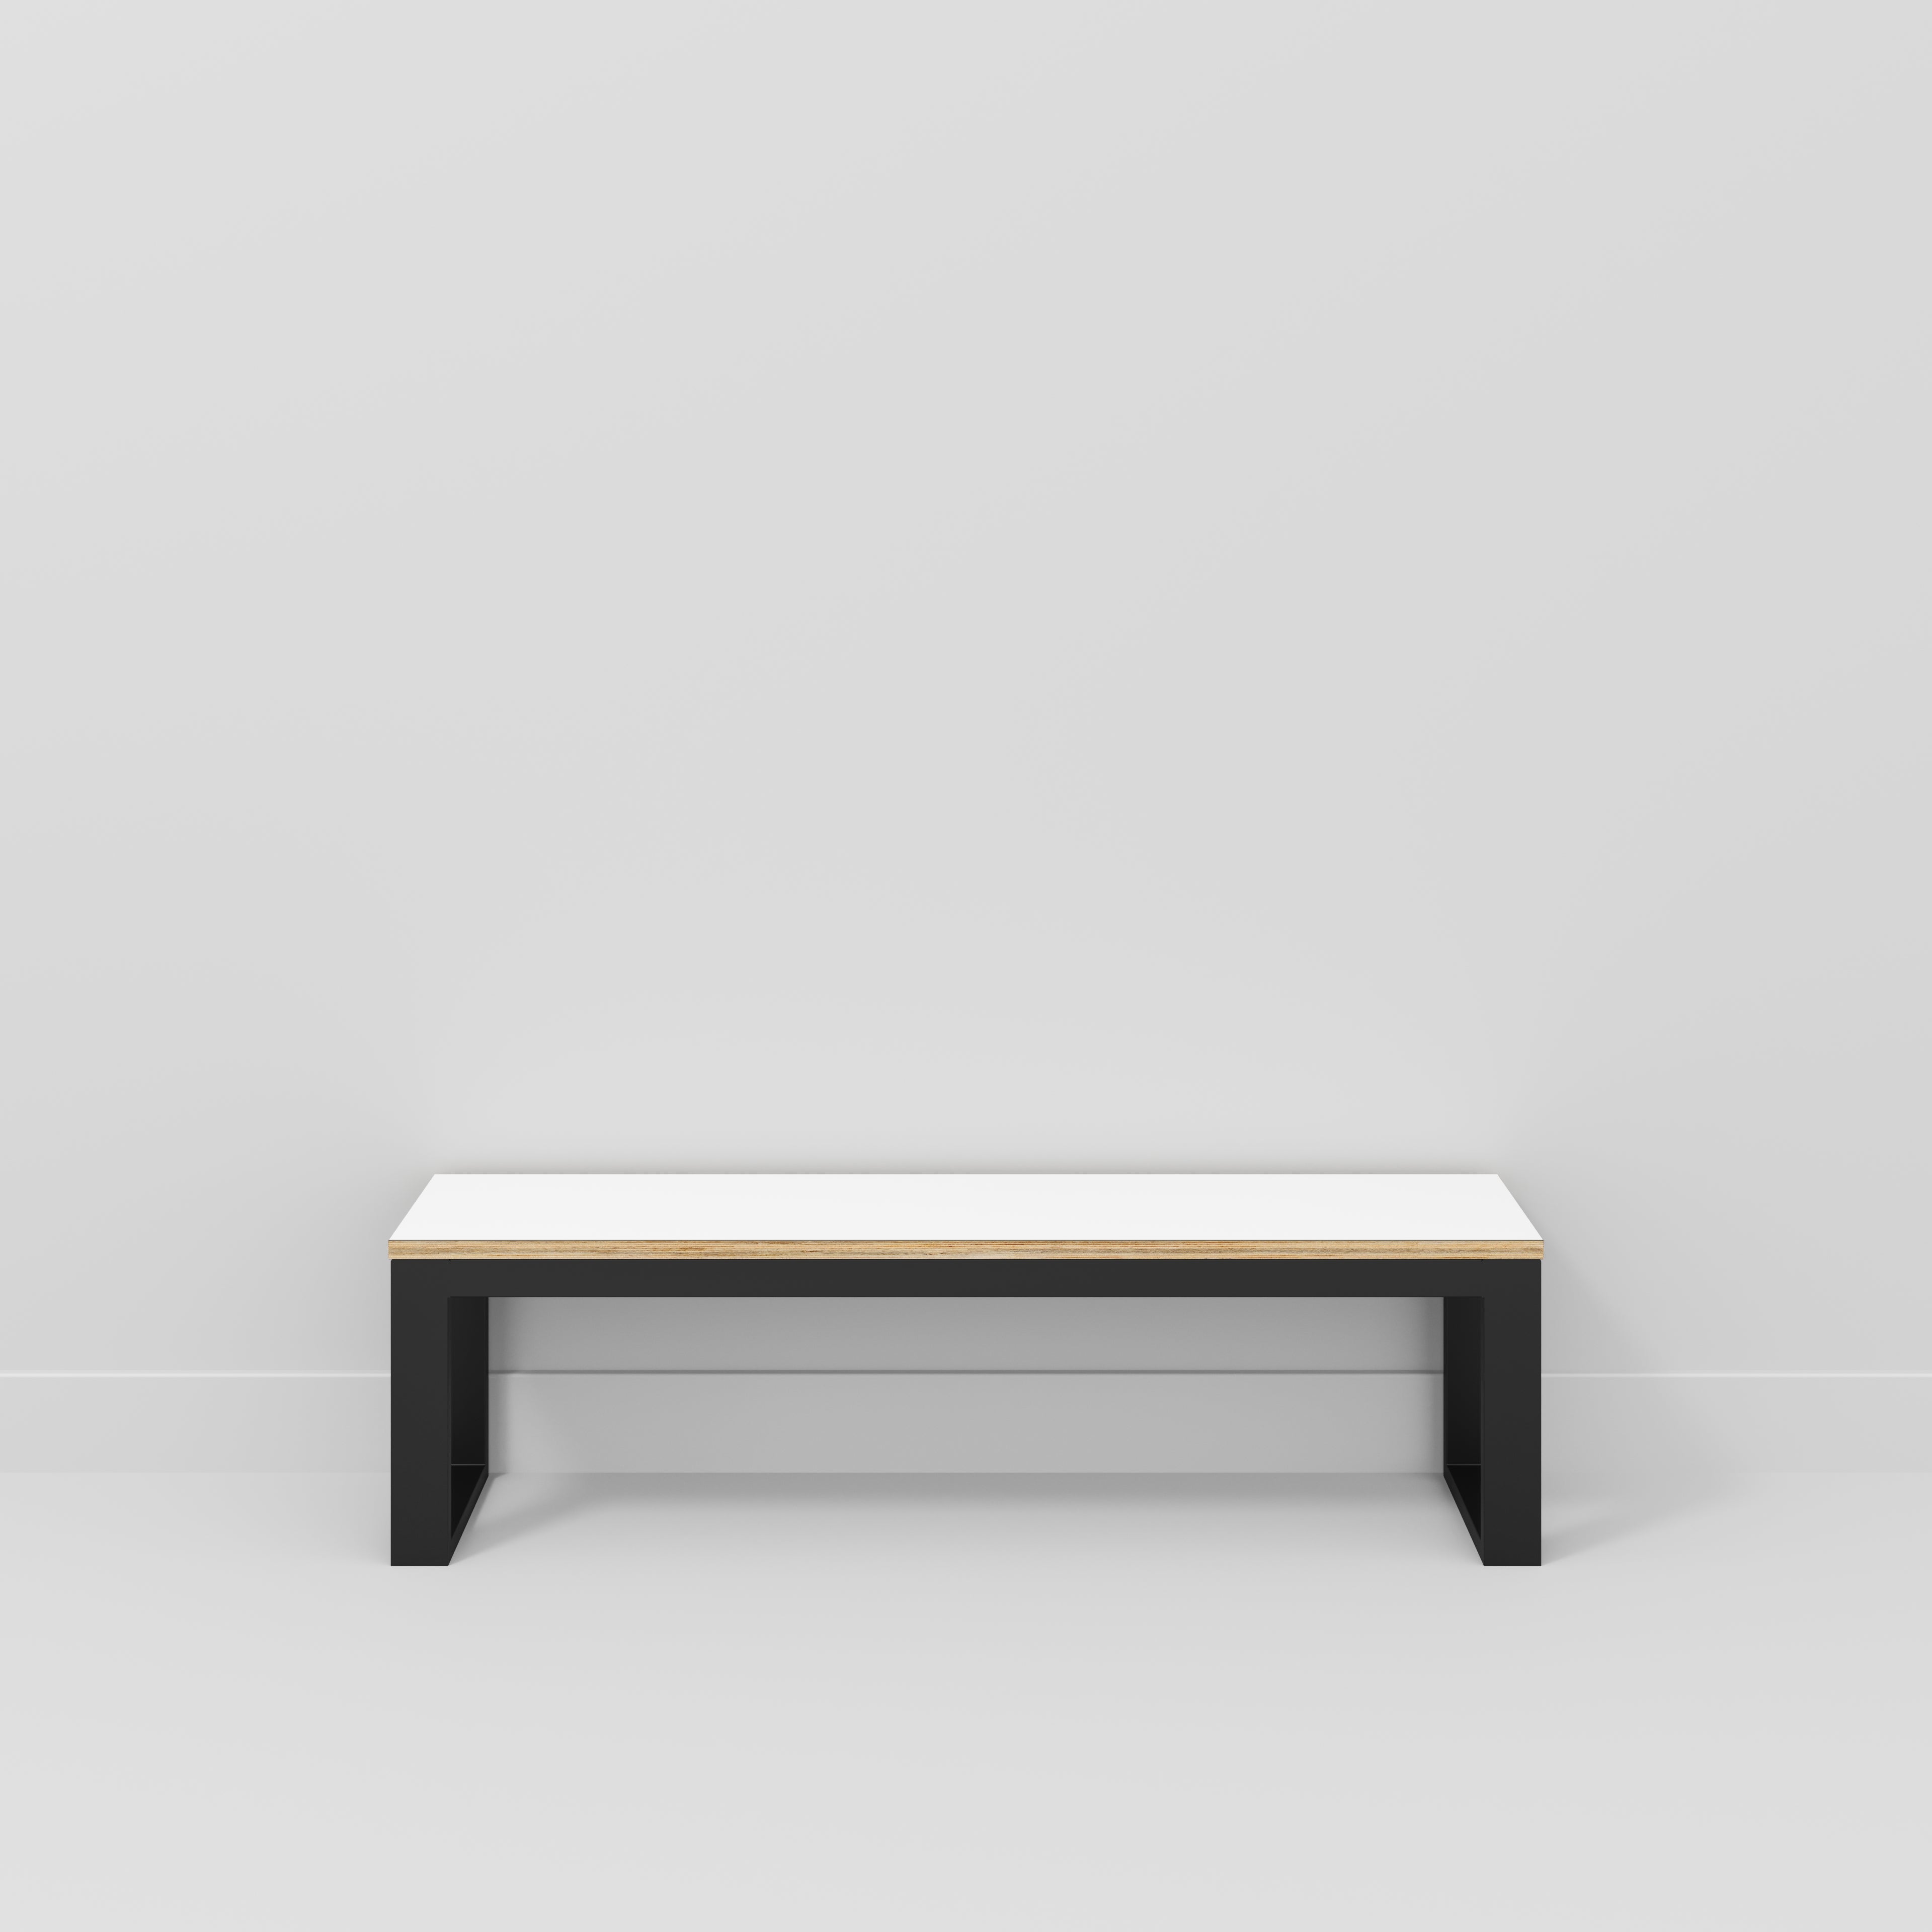 Bench Seat with Black Industrial Frame - Formica White - 1500(w) x 325(d)